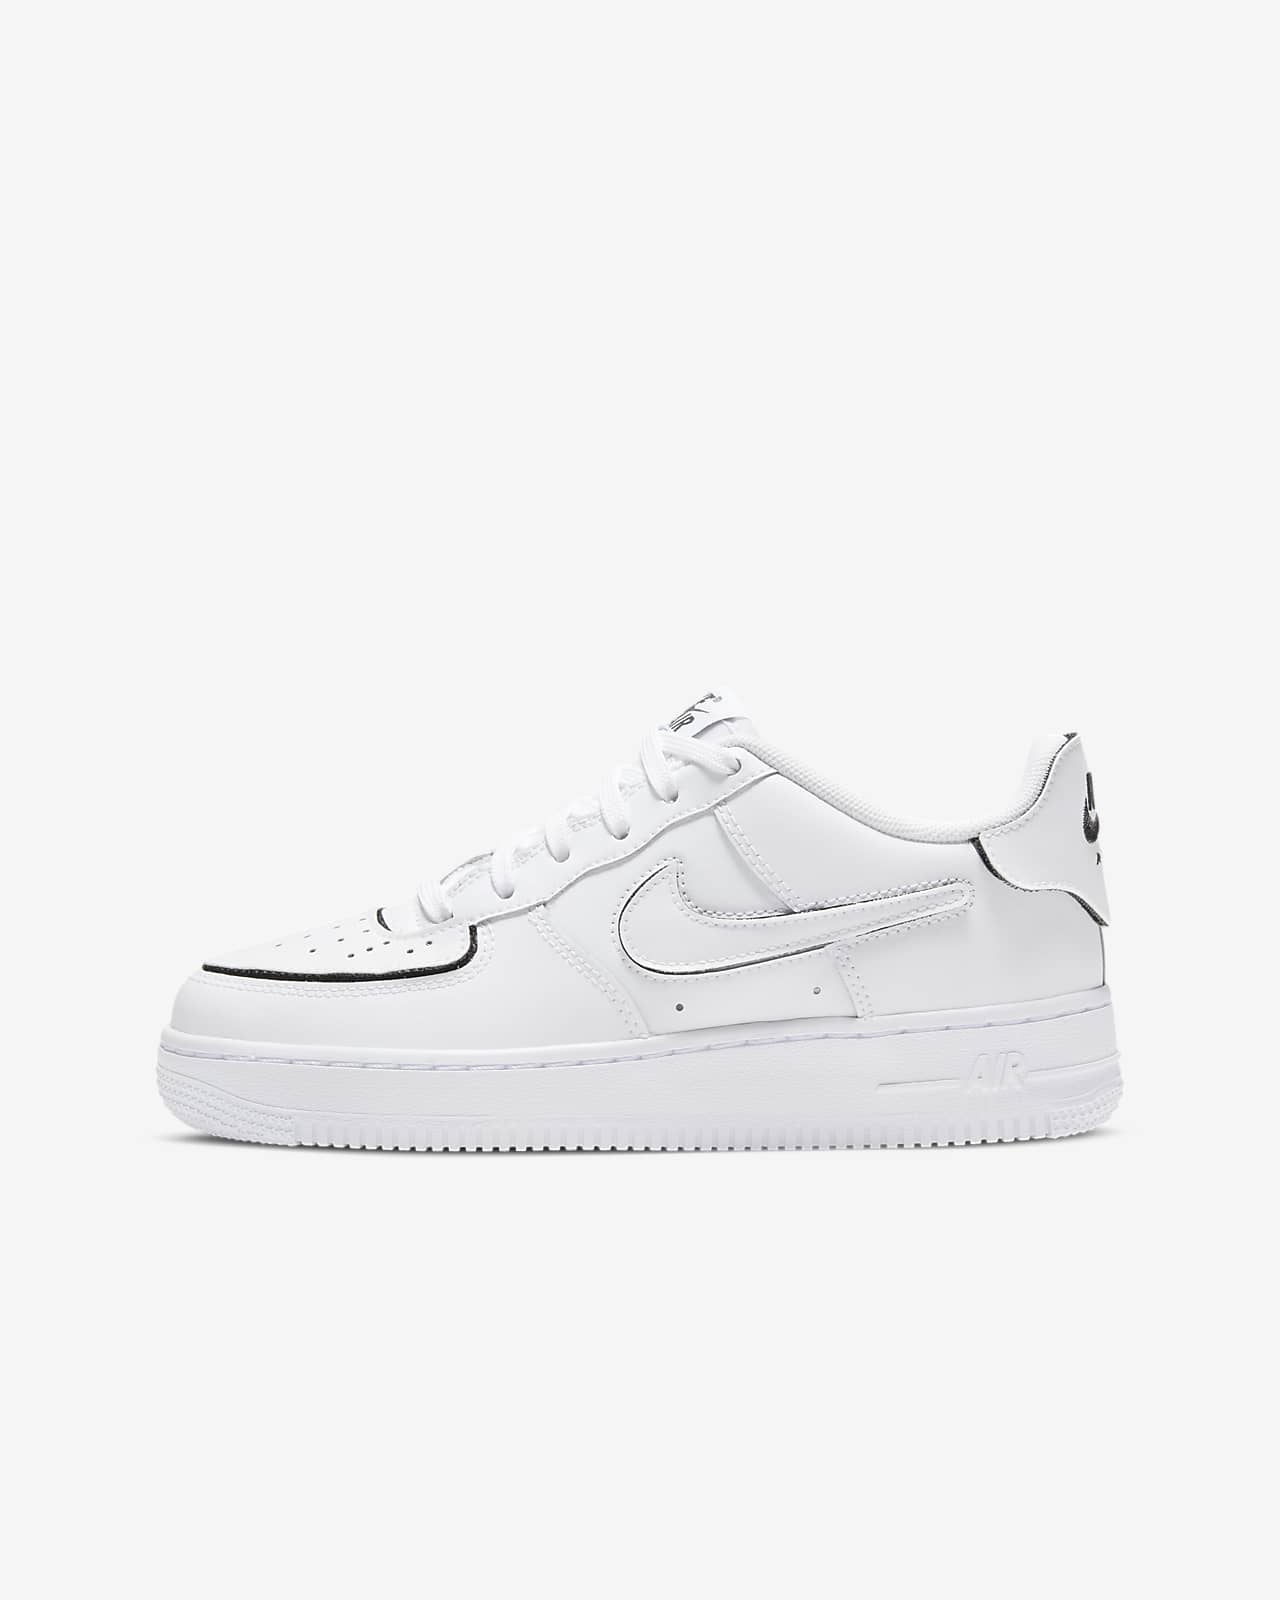 3.5 youth air force 1